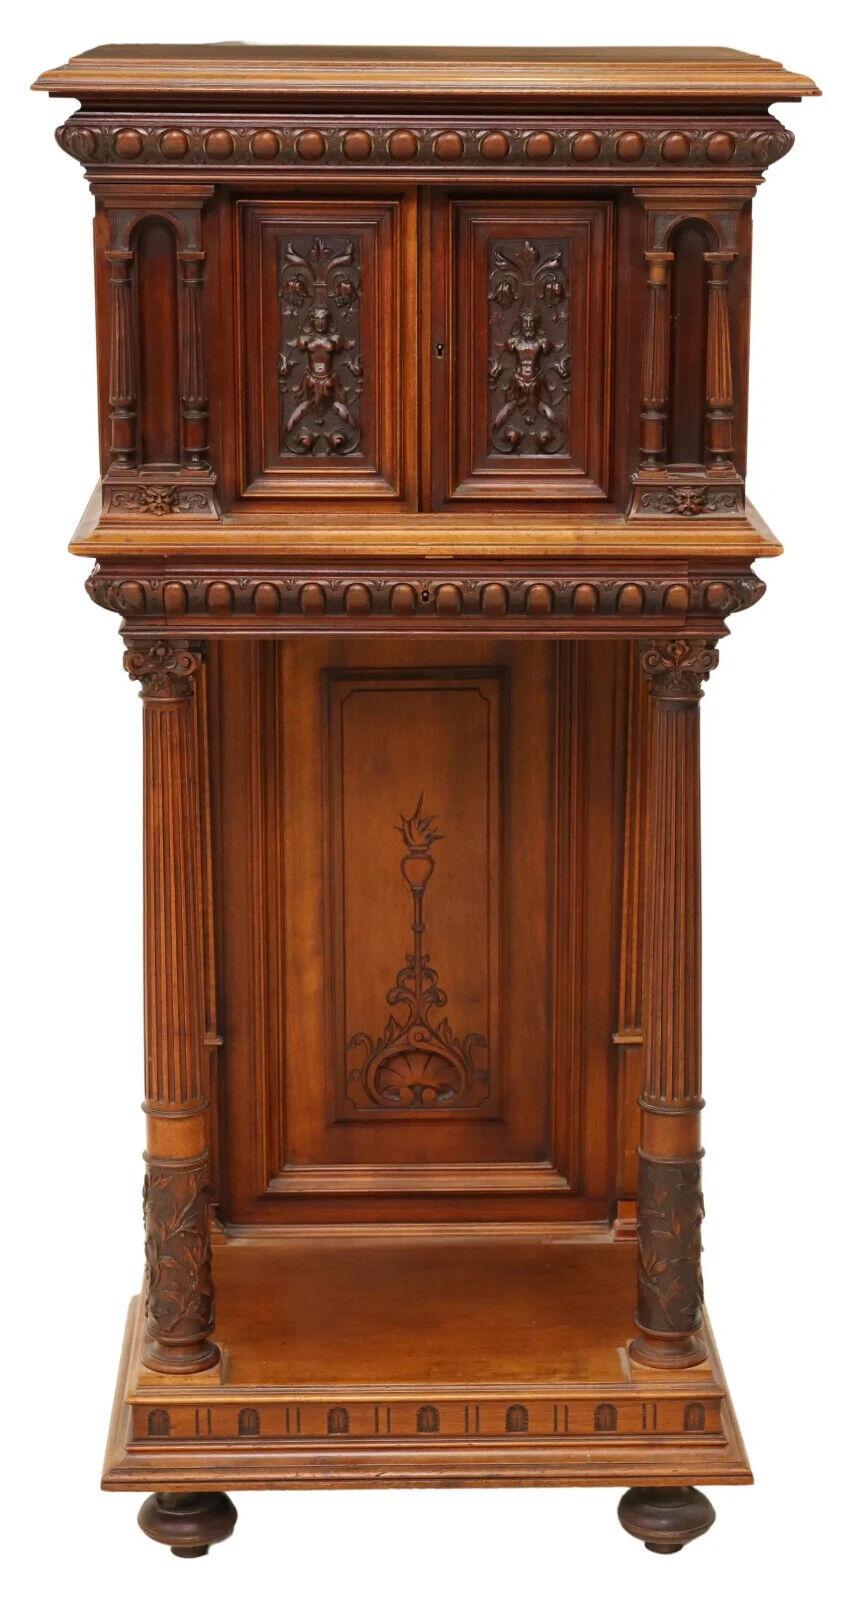 Handsome Antique Cabinet French Neoclassical, Carved, Walnut, On Stand, Figural, 20th Century Early. 1900's!!  Great for displays of your antique treasures!

French Neoclassical carved walnut cabinet, early 20th c., having stepped cornice, dual